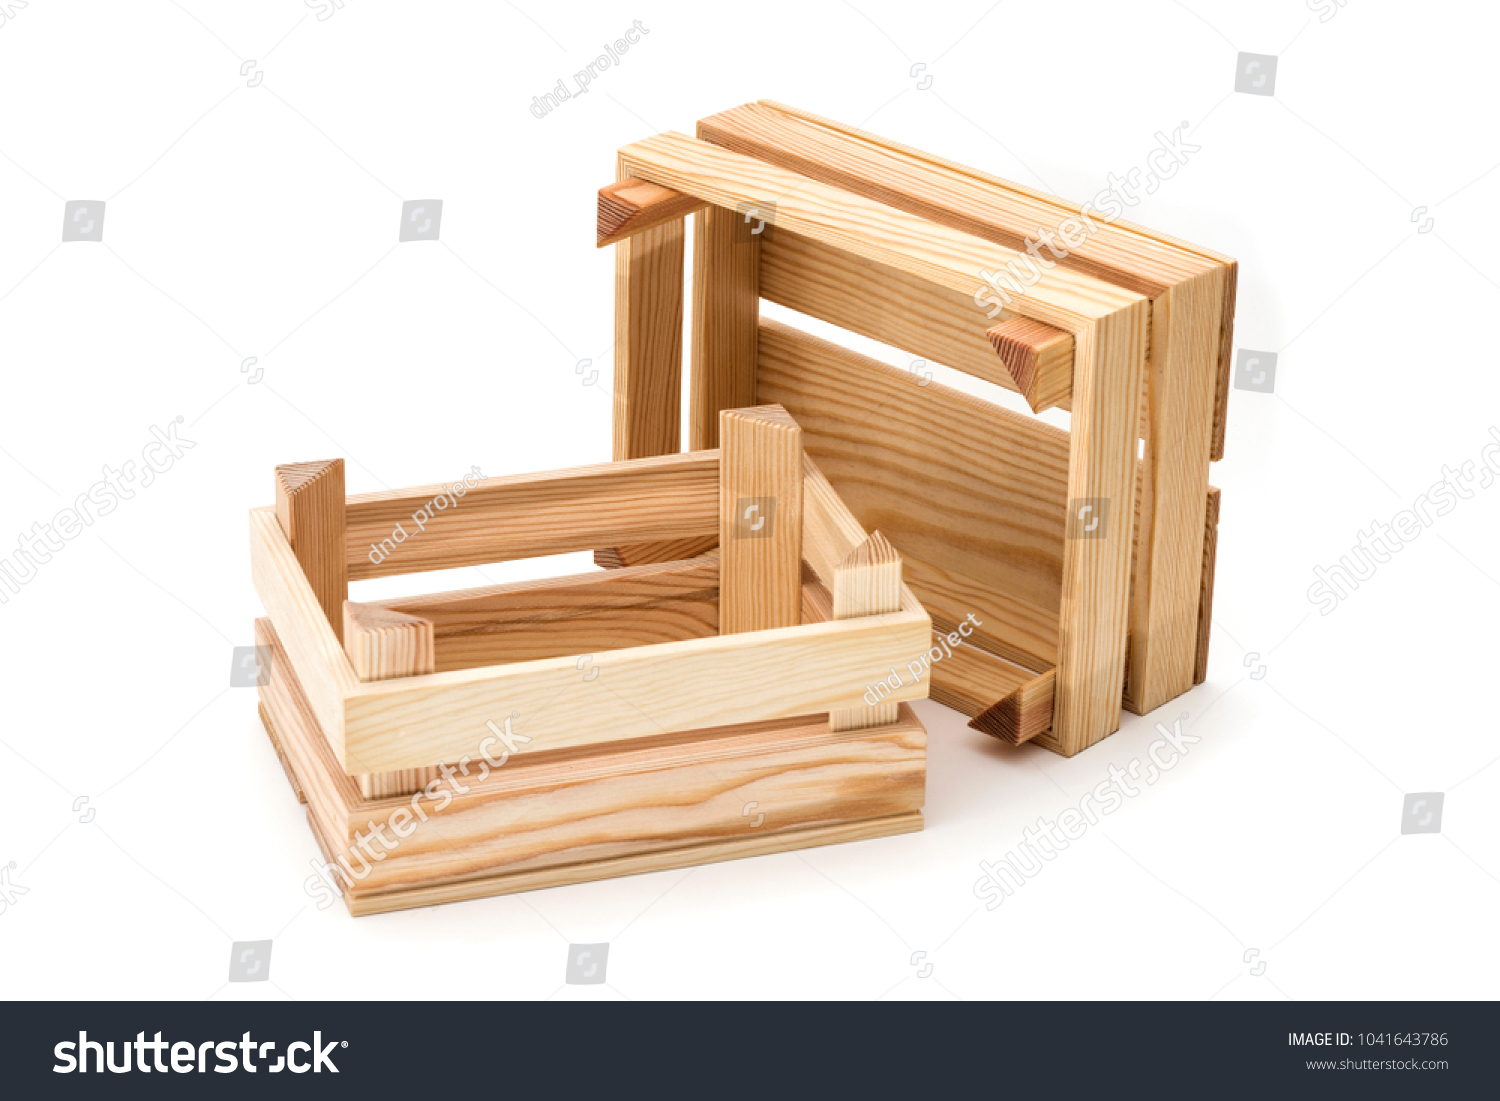 Empty wooden crates on a white background. #1041643786